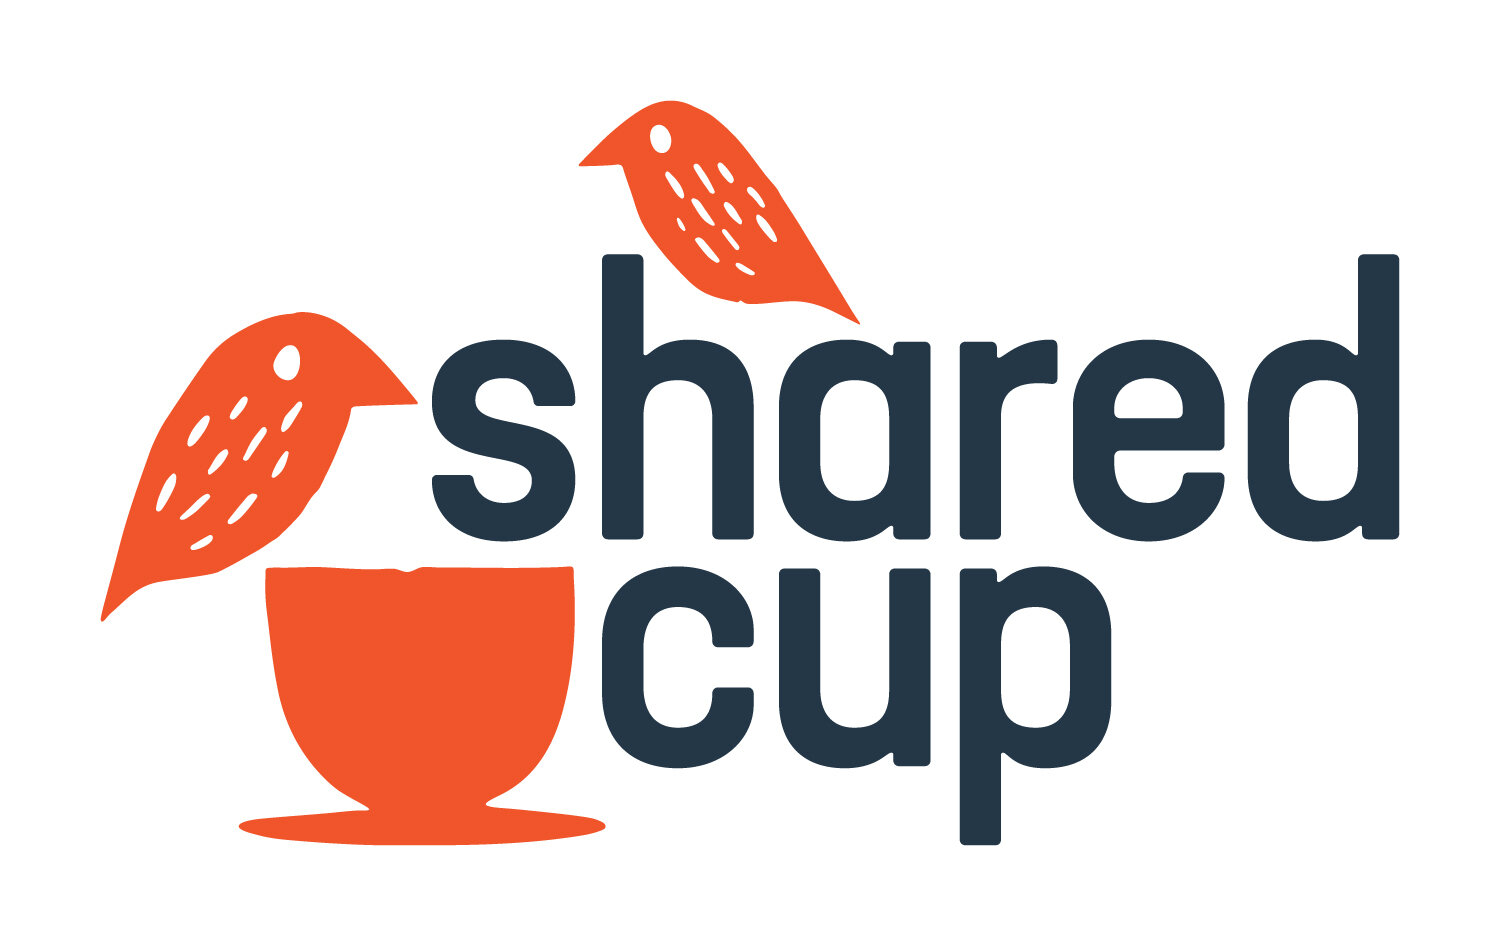 Shared Cup